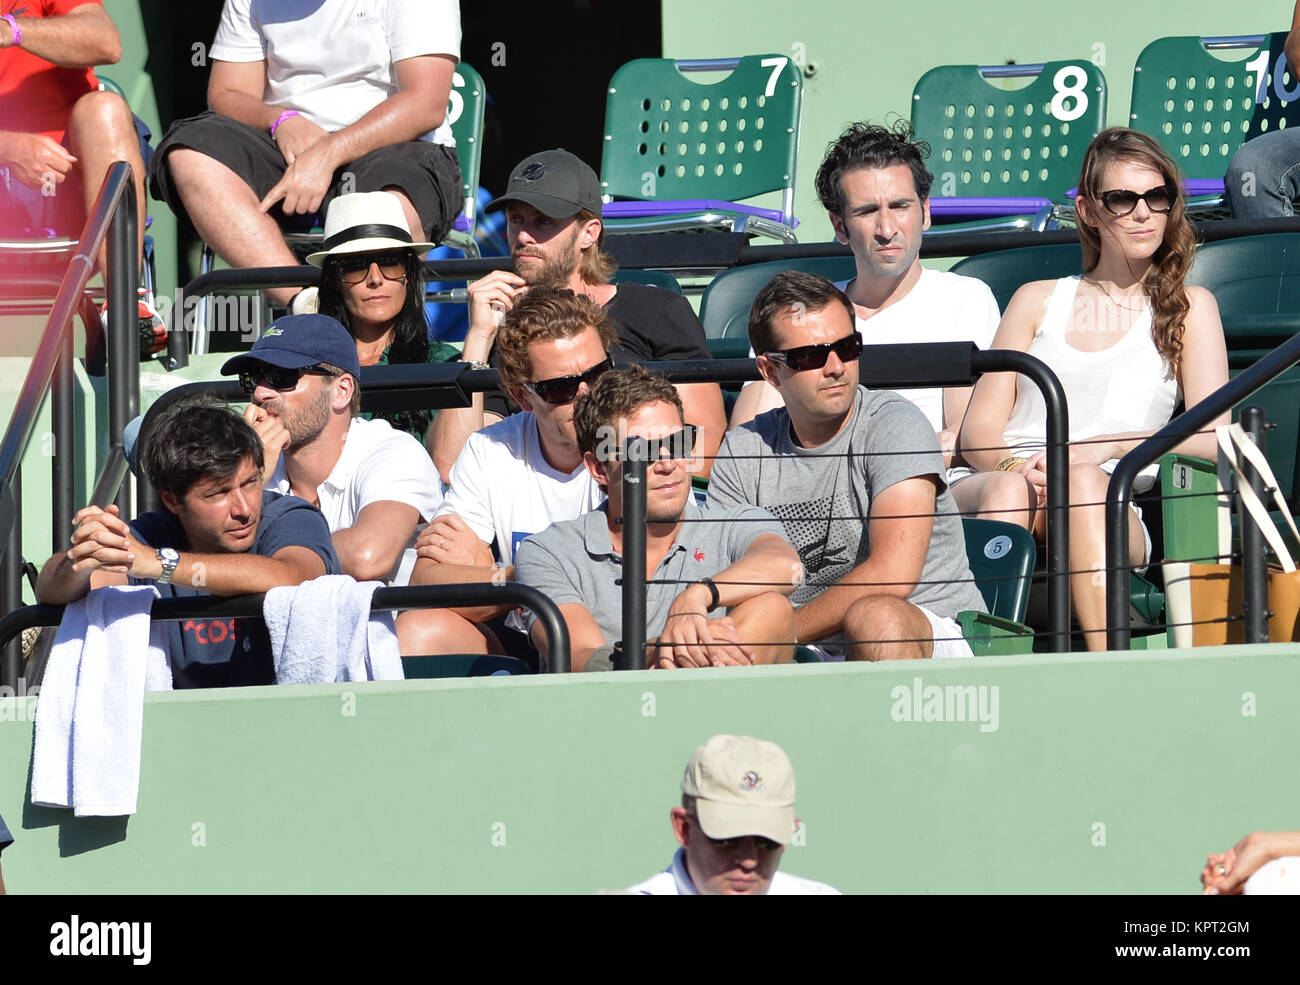 KEY BISCAYNE, FL - MARCH 25: Roger Federer of Switzerland defeats Richard Gasquet of France during their fourth round match during day 9 at the Sony Open at Crandon Park Tennis Center on March 25, 2014 in Key Biscayne, Florida  People:  Richard Gasquet Box Stock Photo